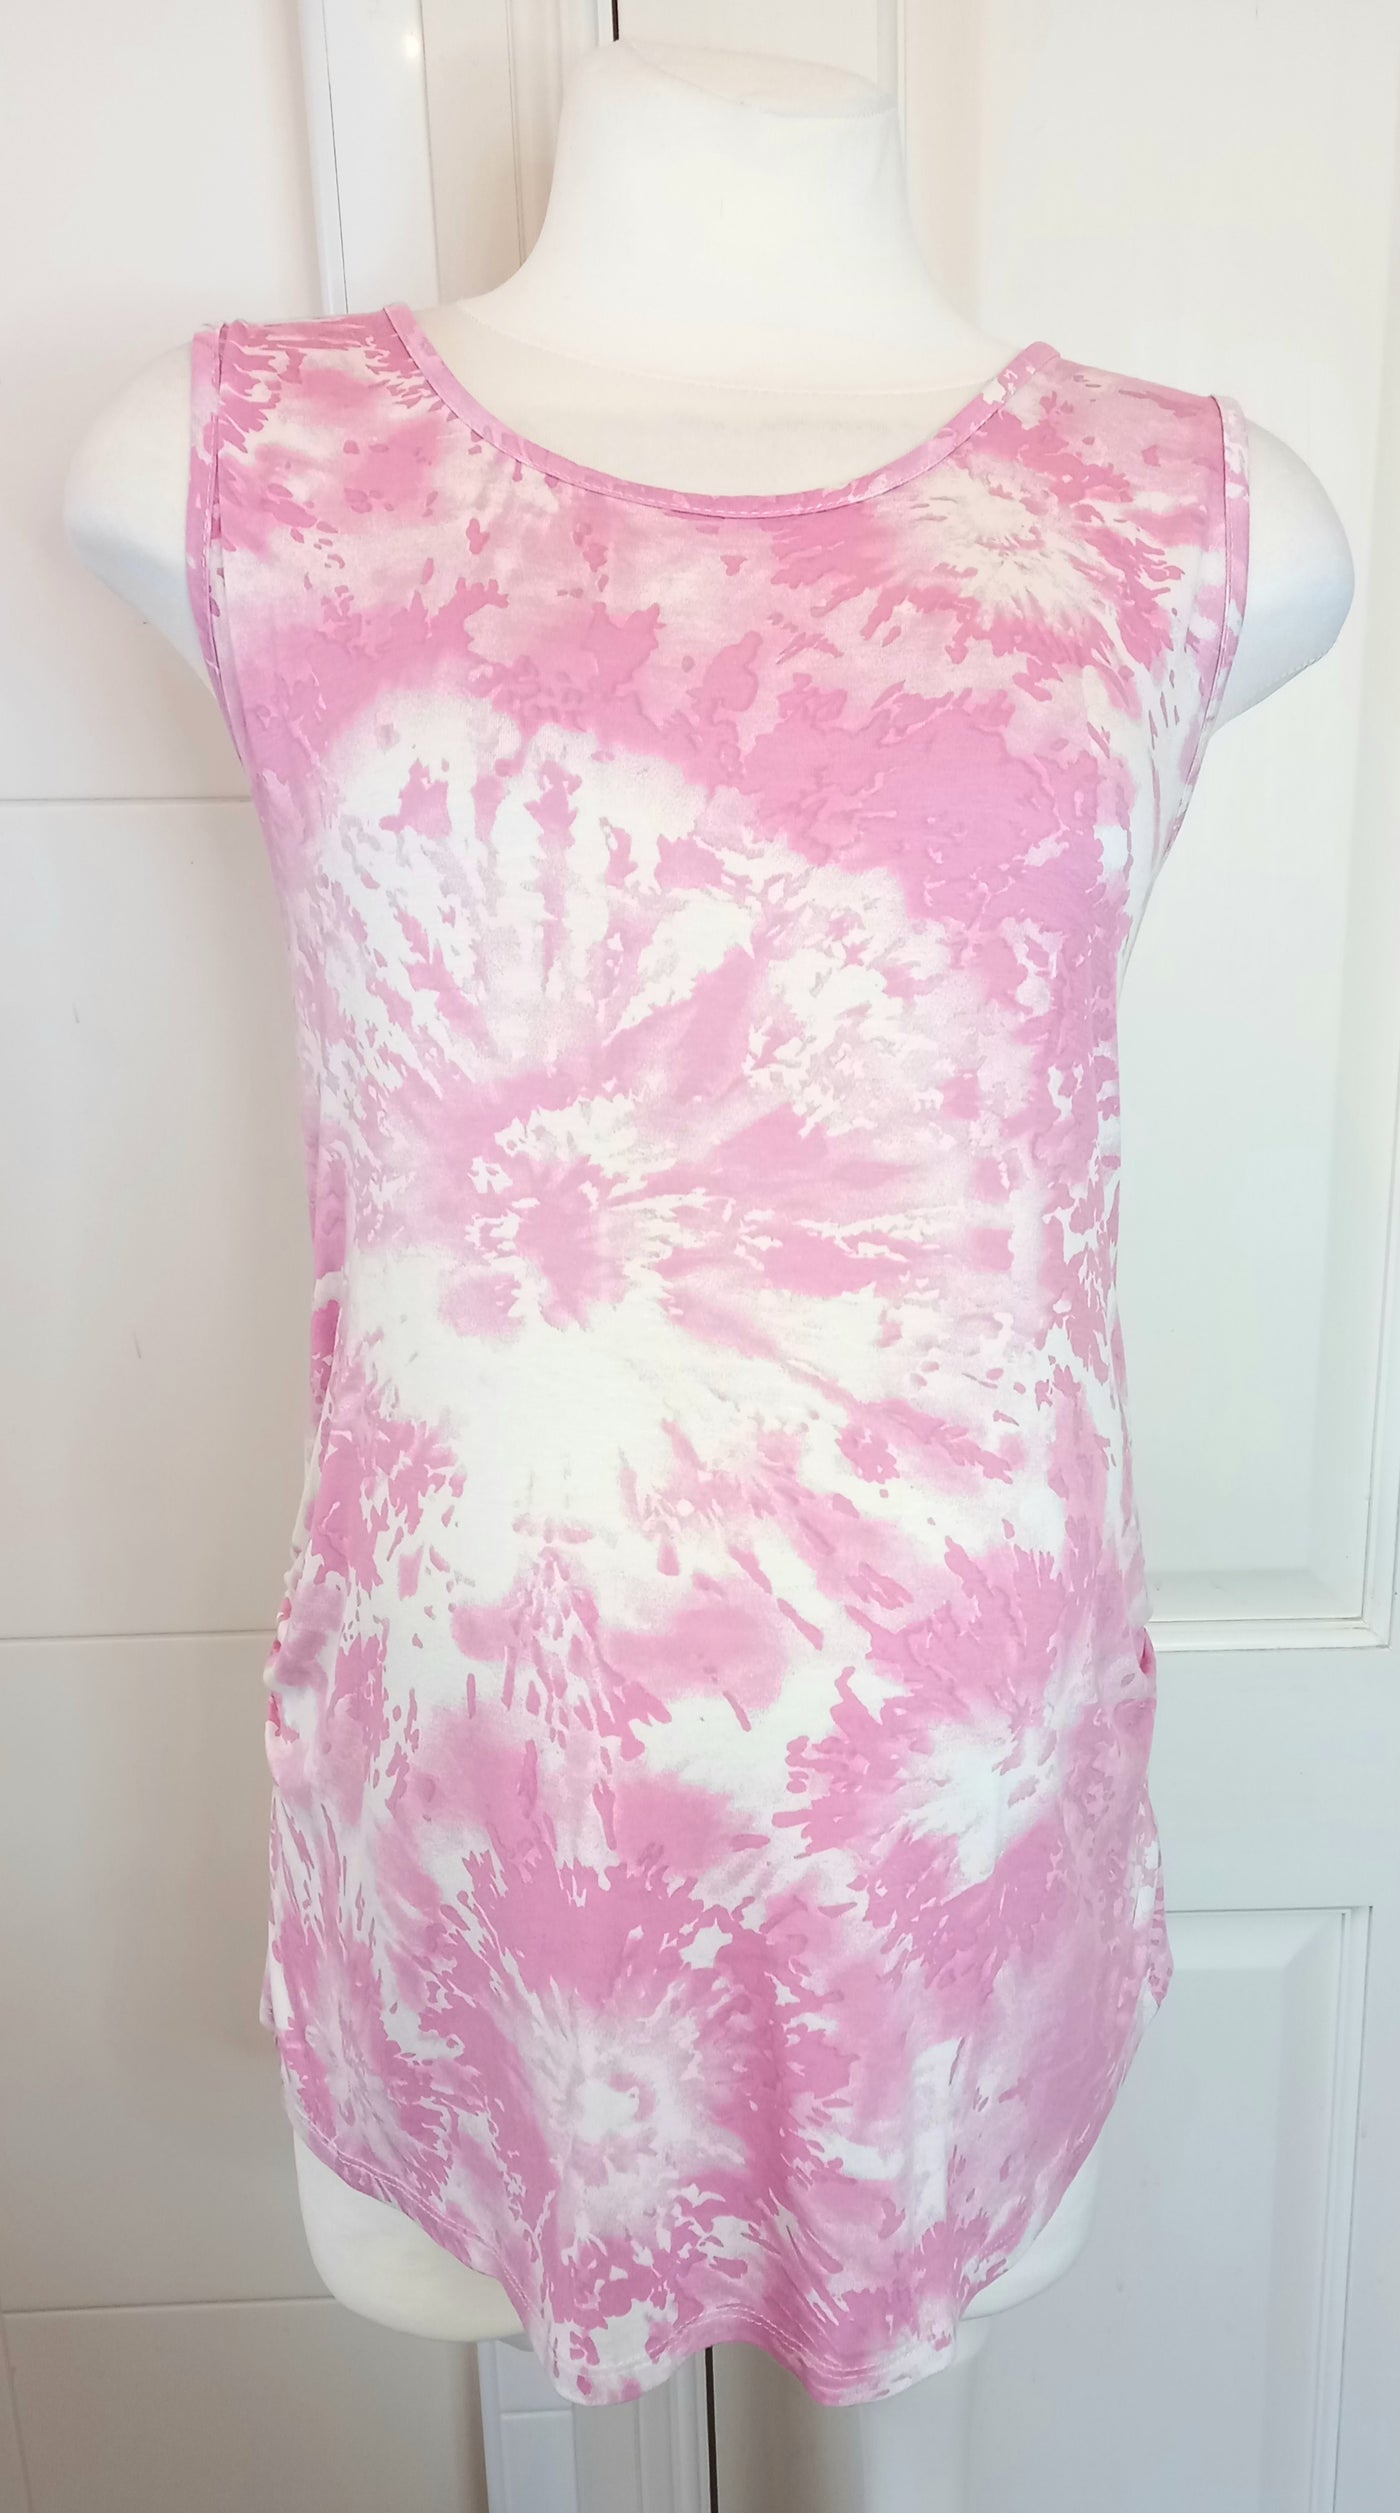 Dorothy Perkins Maternity Pink & White Tie Dye Sleeveless Top - Size 12